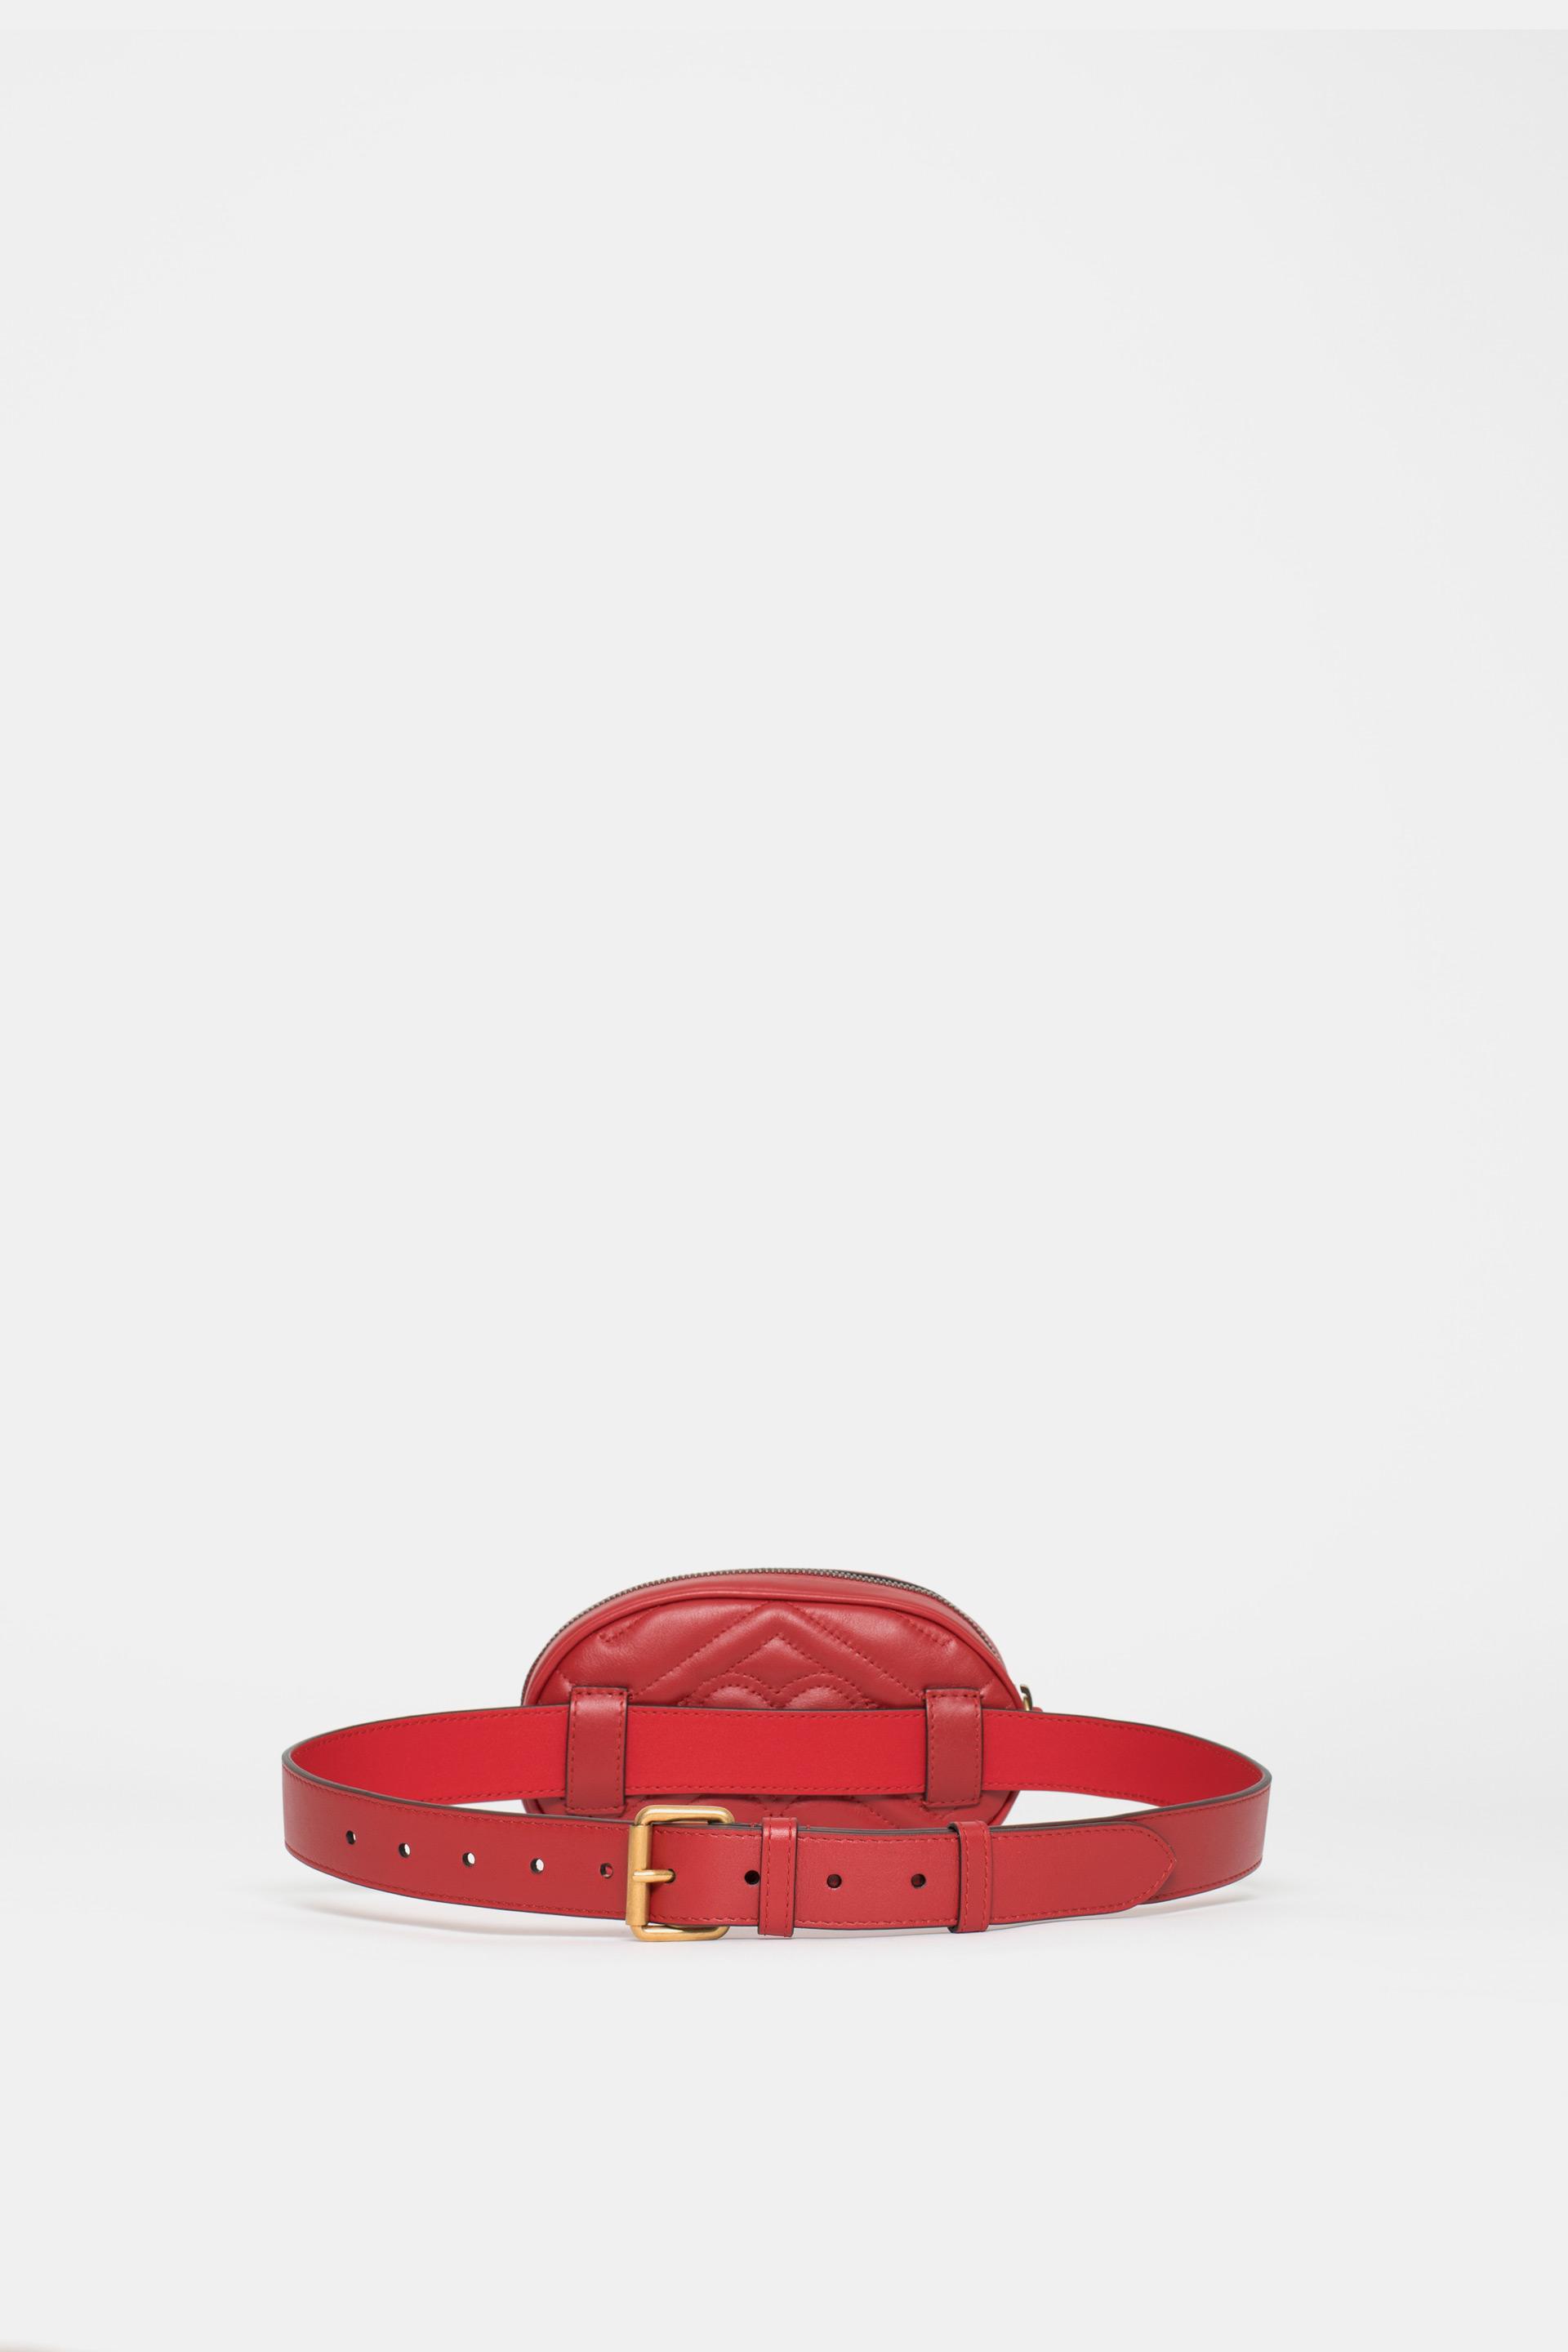 Gucci Leather Marmont Matelass Belt Bag in Pink - Lyst